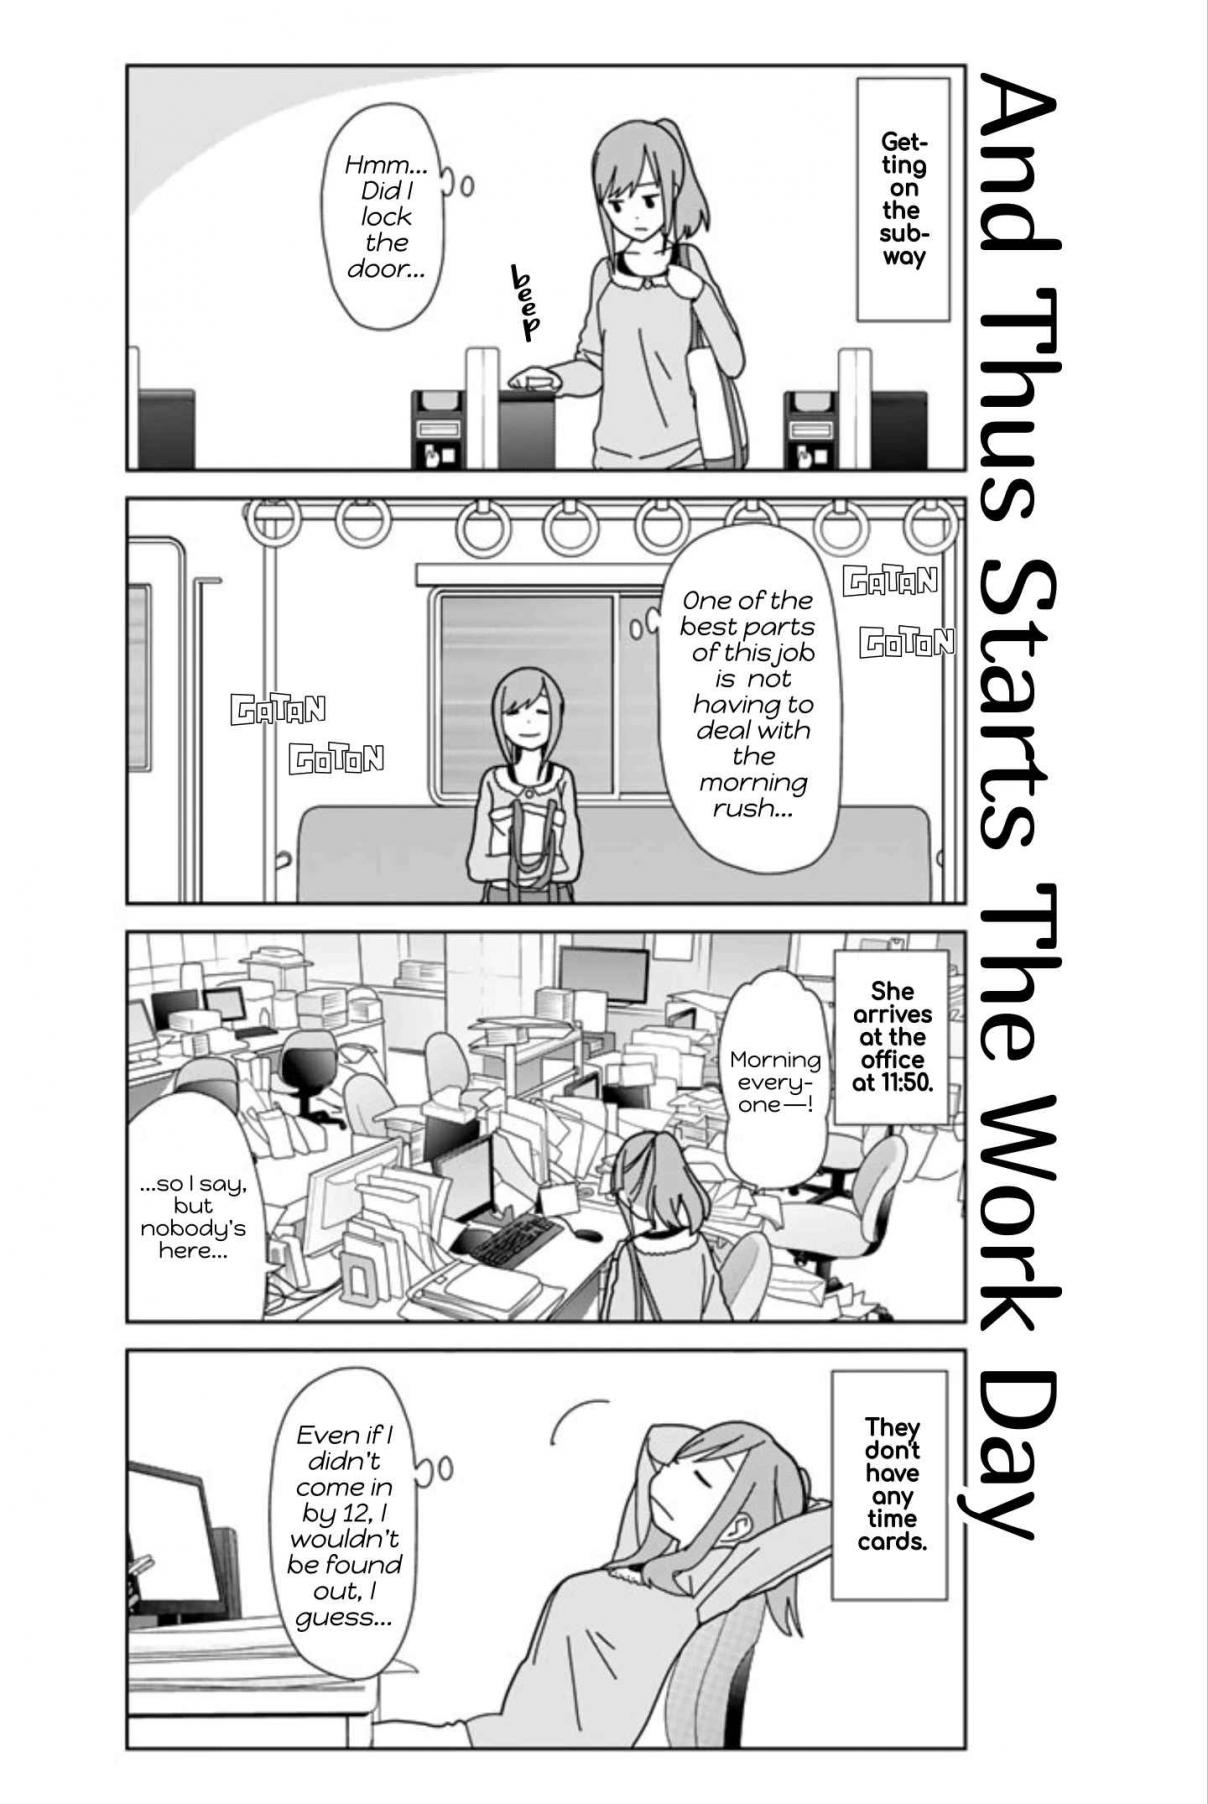 Kin no Tamago Vol. 2 Ch. 18 A Day in the Life of Tamako